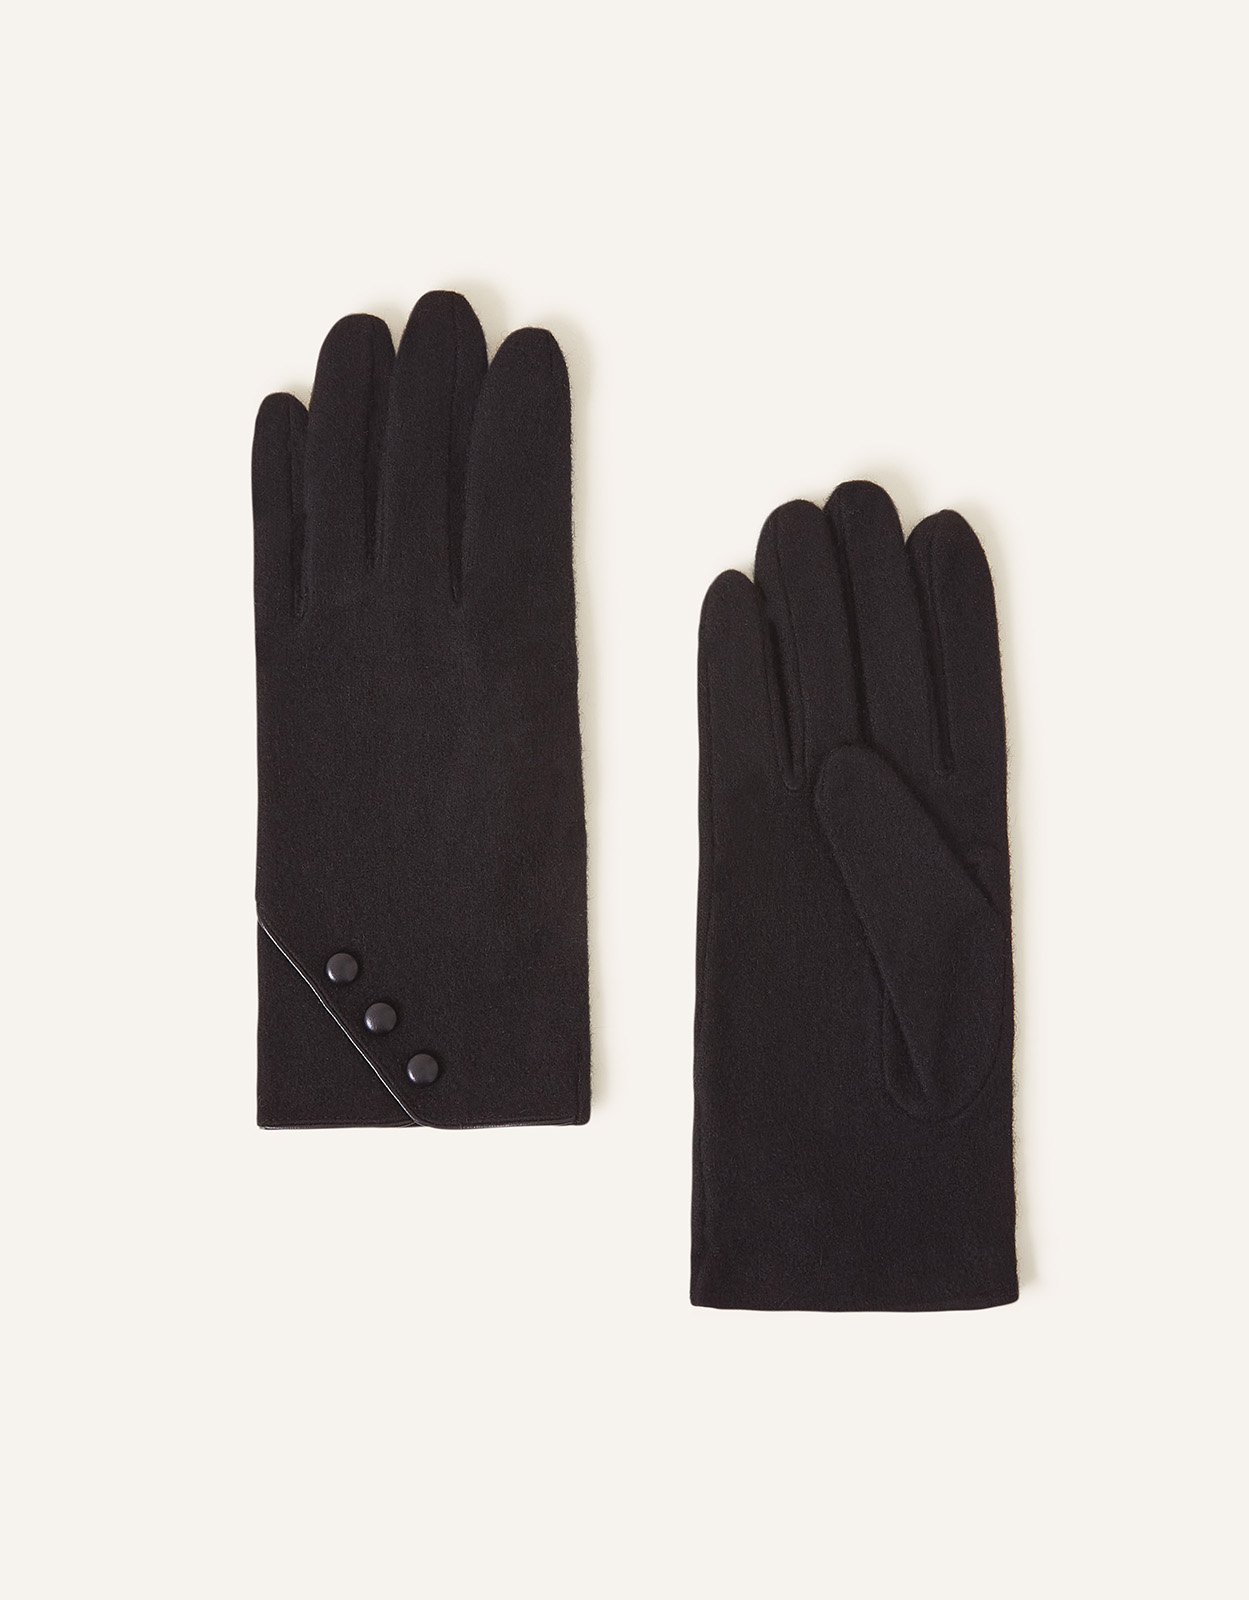 Accessorize Women's Touchscreen Button Gloves in Wool Blend Black, Size: One Size